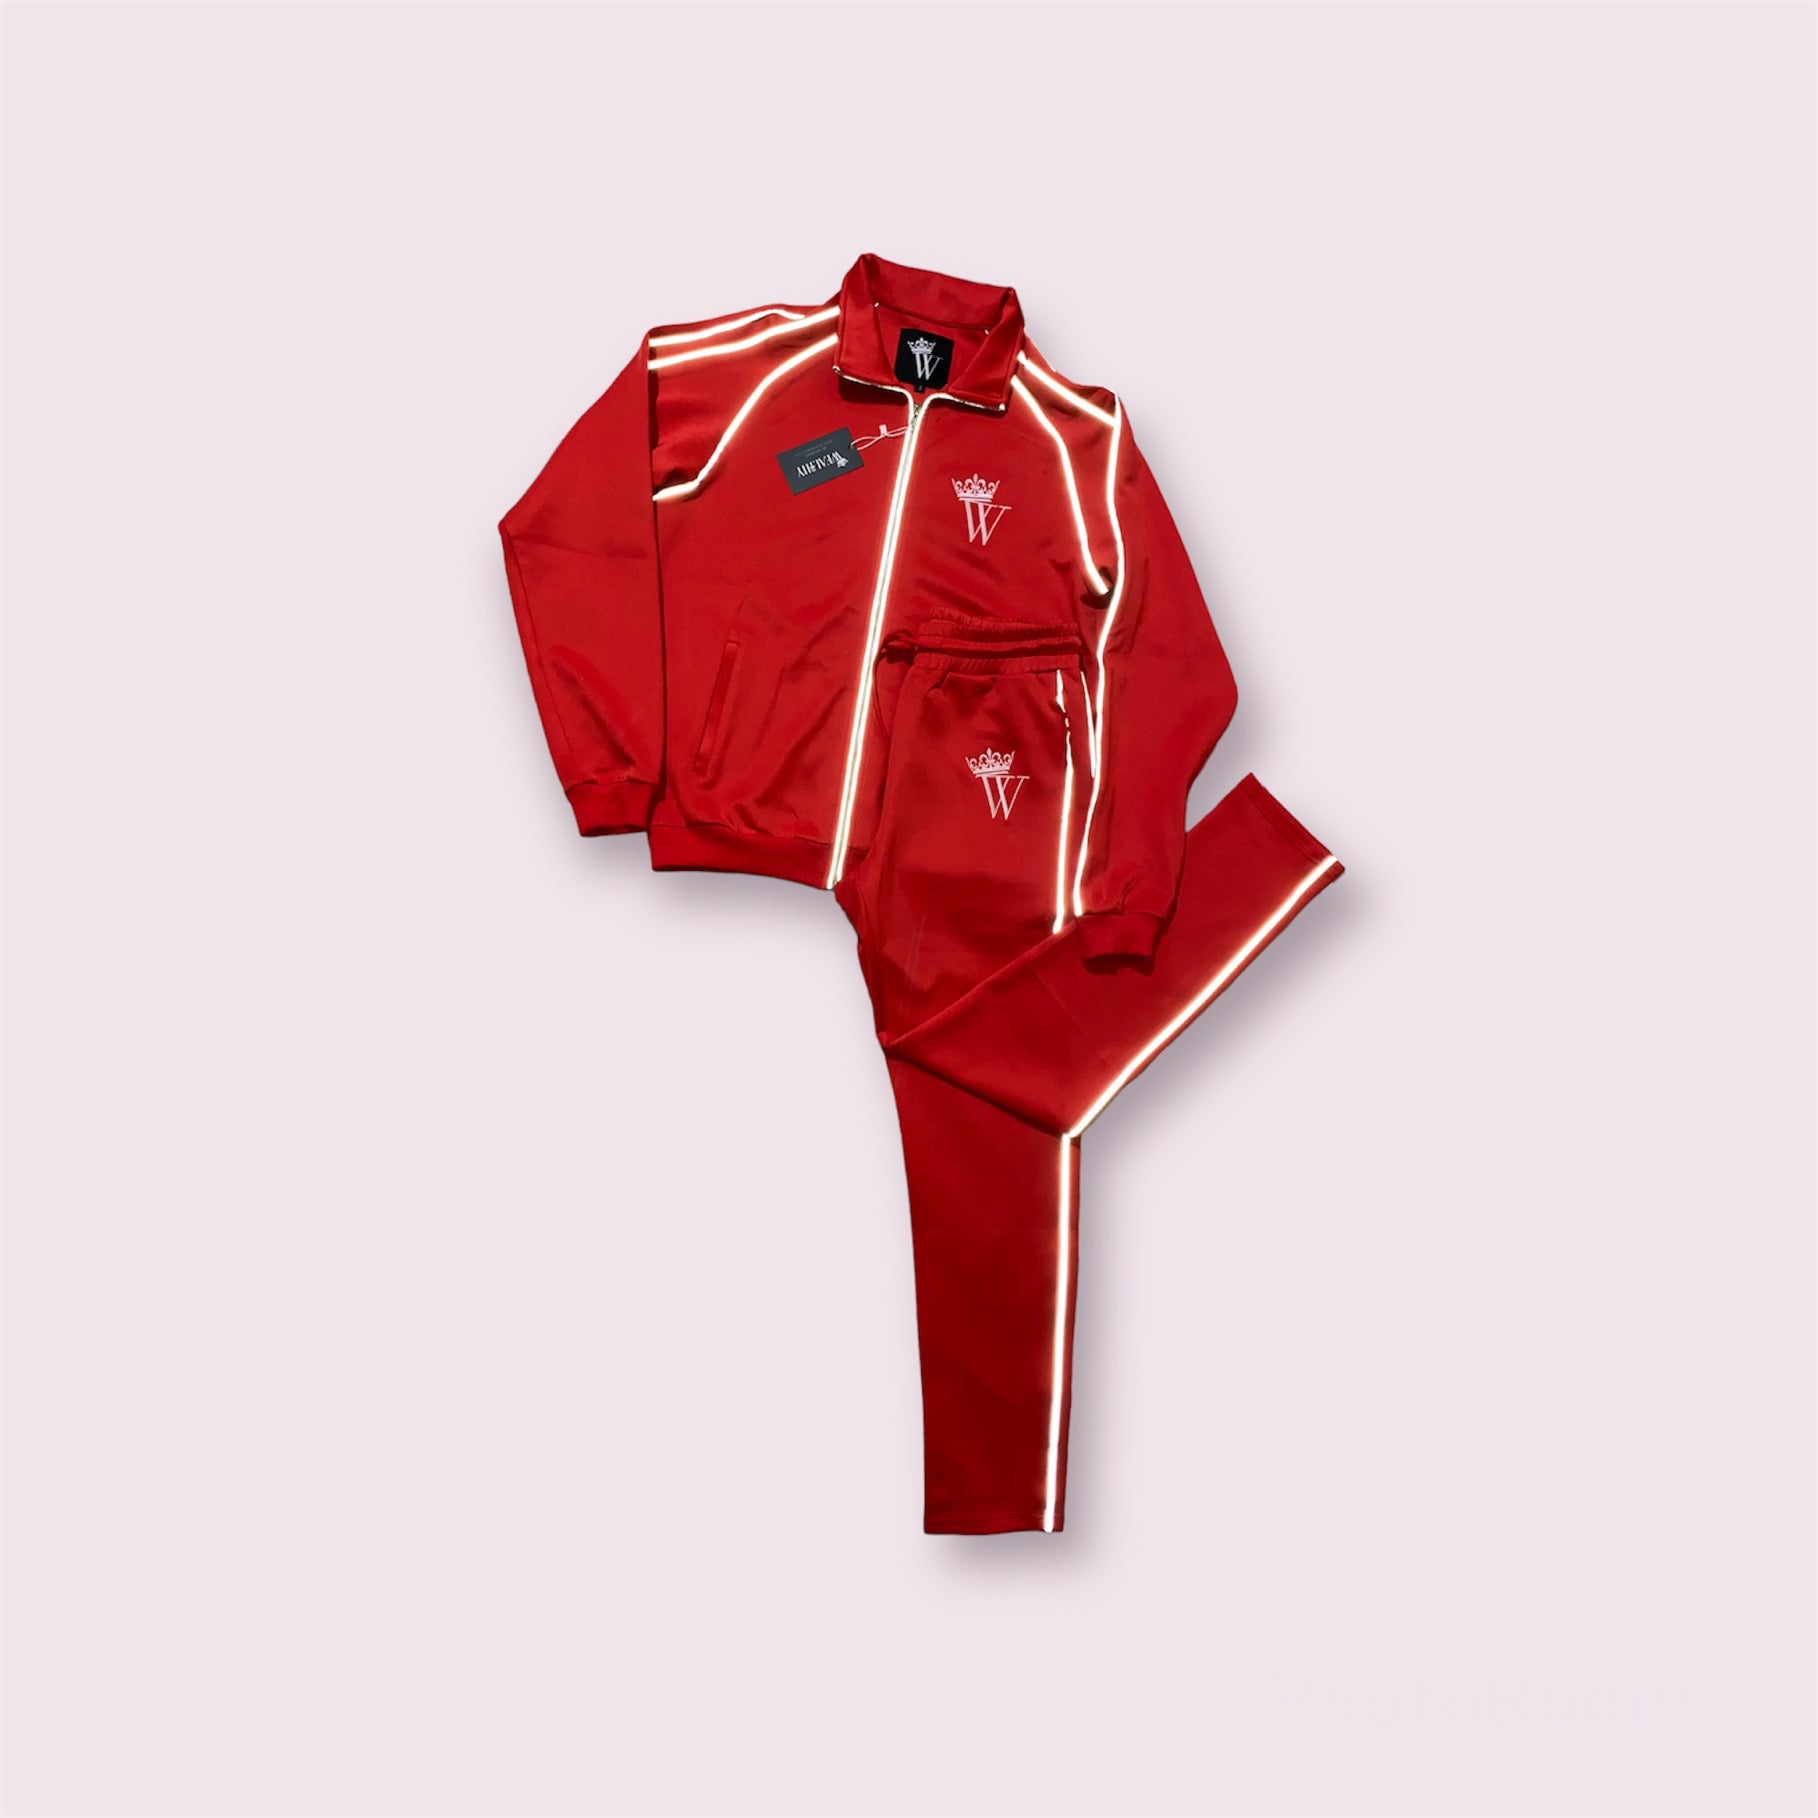 Reflective Tracksuit - Red